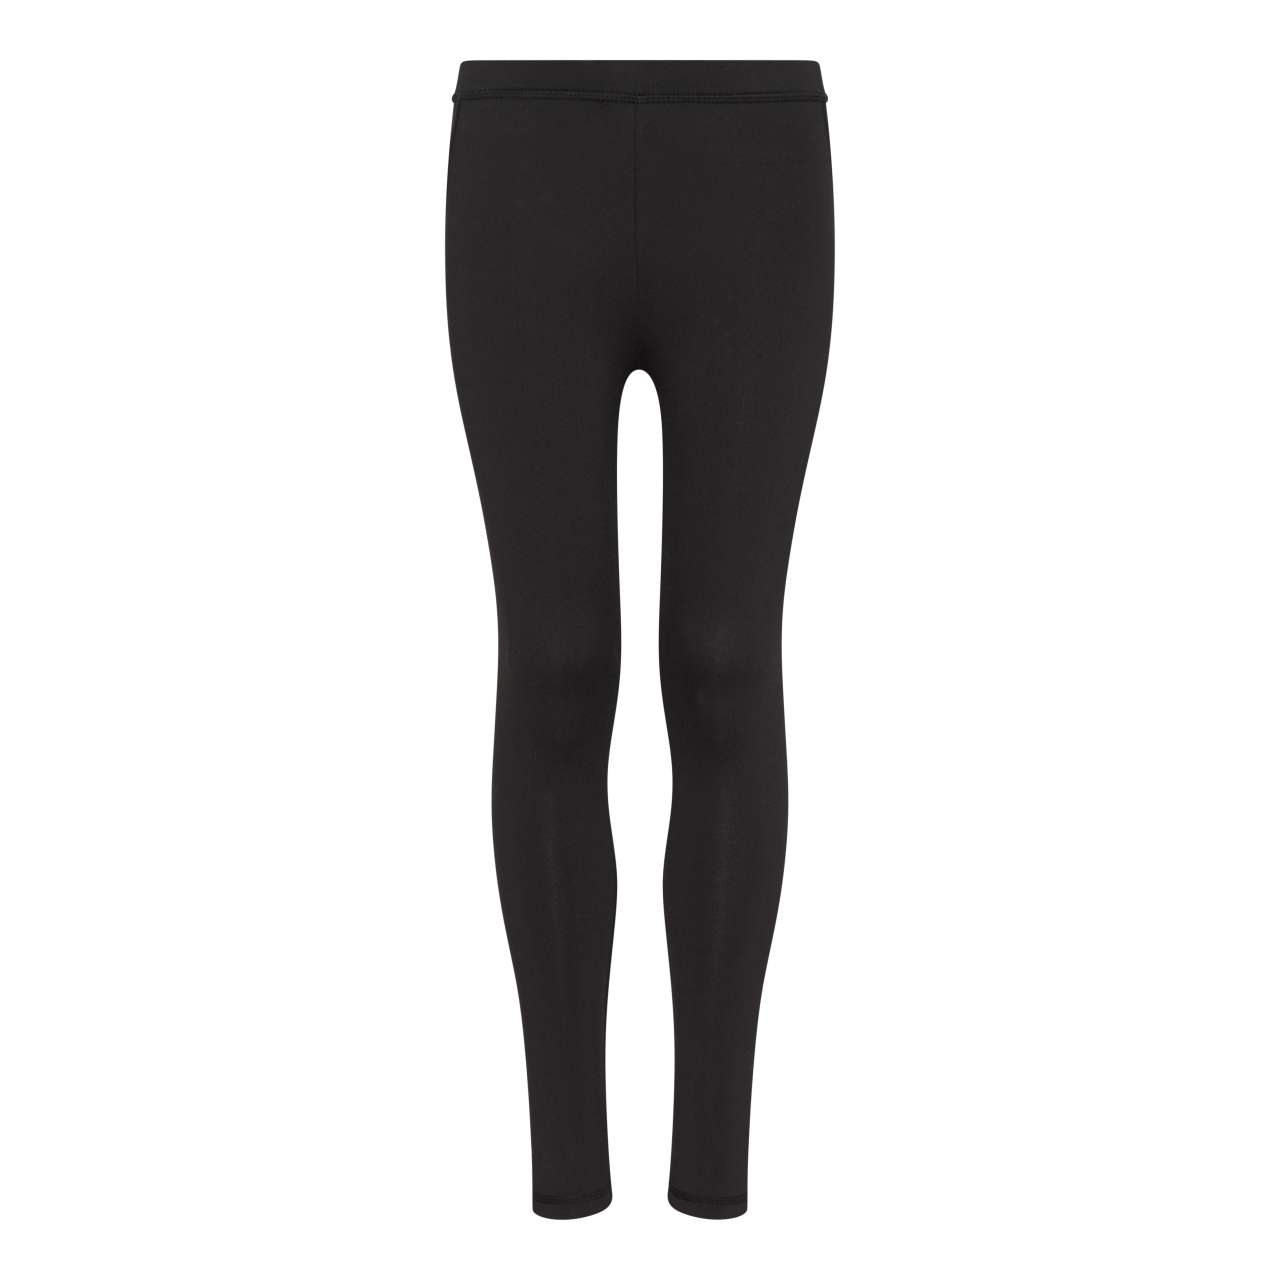 Promo  GIRLS COOL ATHLETIC PANT